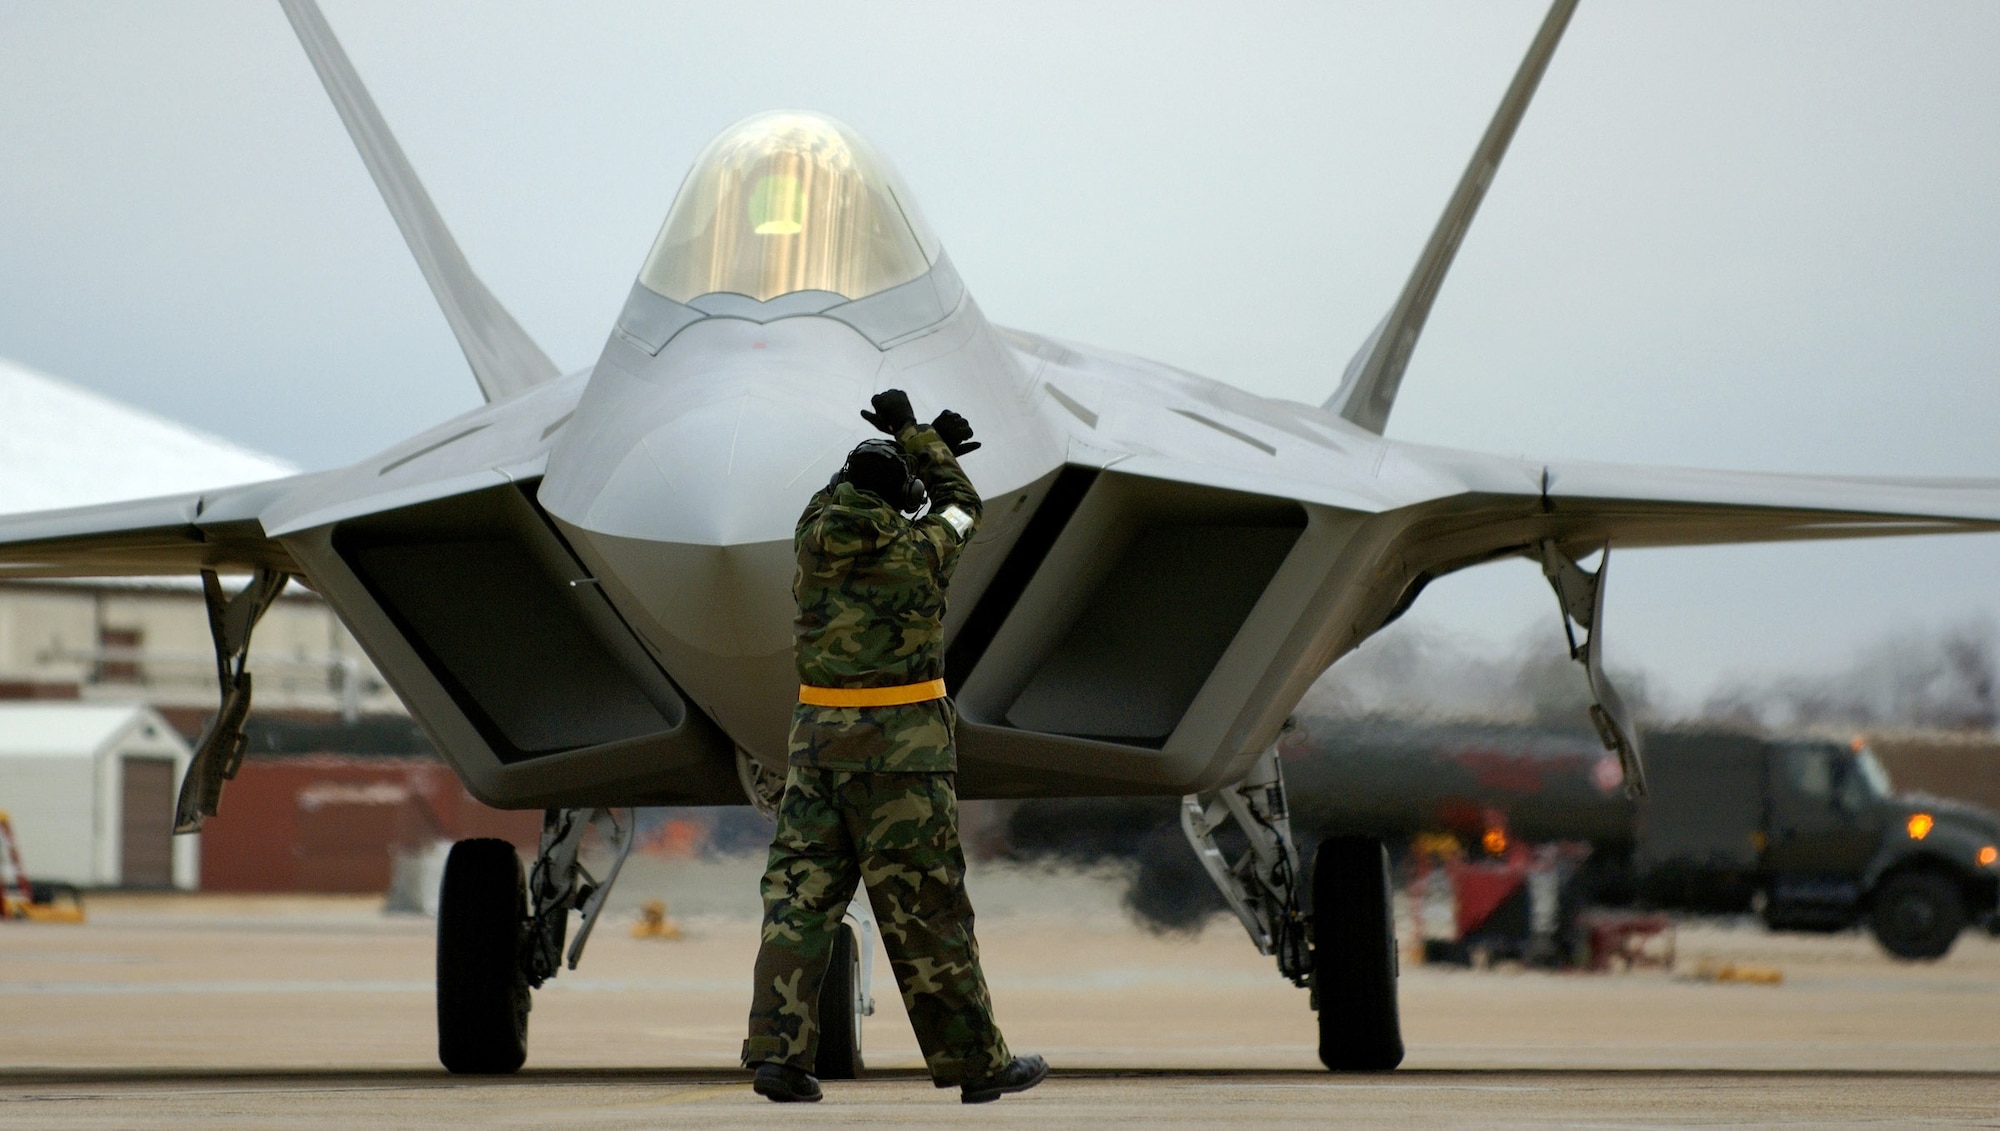 LANGLEY AIR FORCE BASE, Va. (AFPN) -- Crew chief Staff Sgt. Adam Murtishaw guides an F-22A Raptor into its parking space after a Dec. 14 mission. The 27th Fighter Squadron earned initial operating capability today, which means the stealth jet is combat ready. Sergeant Murtishaw is with the 27th Aircraft Maintenance Unit. (U.S. Air Force photo by Tech. Sgt. Ben Bloker)